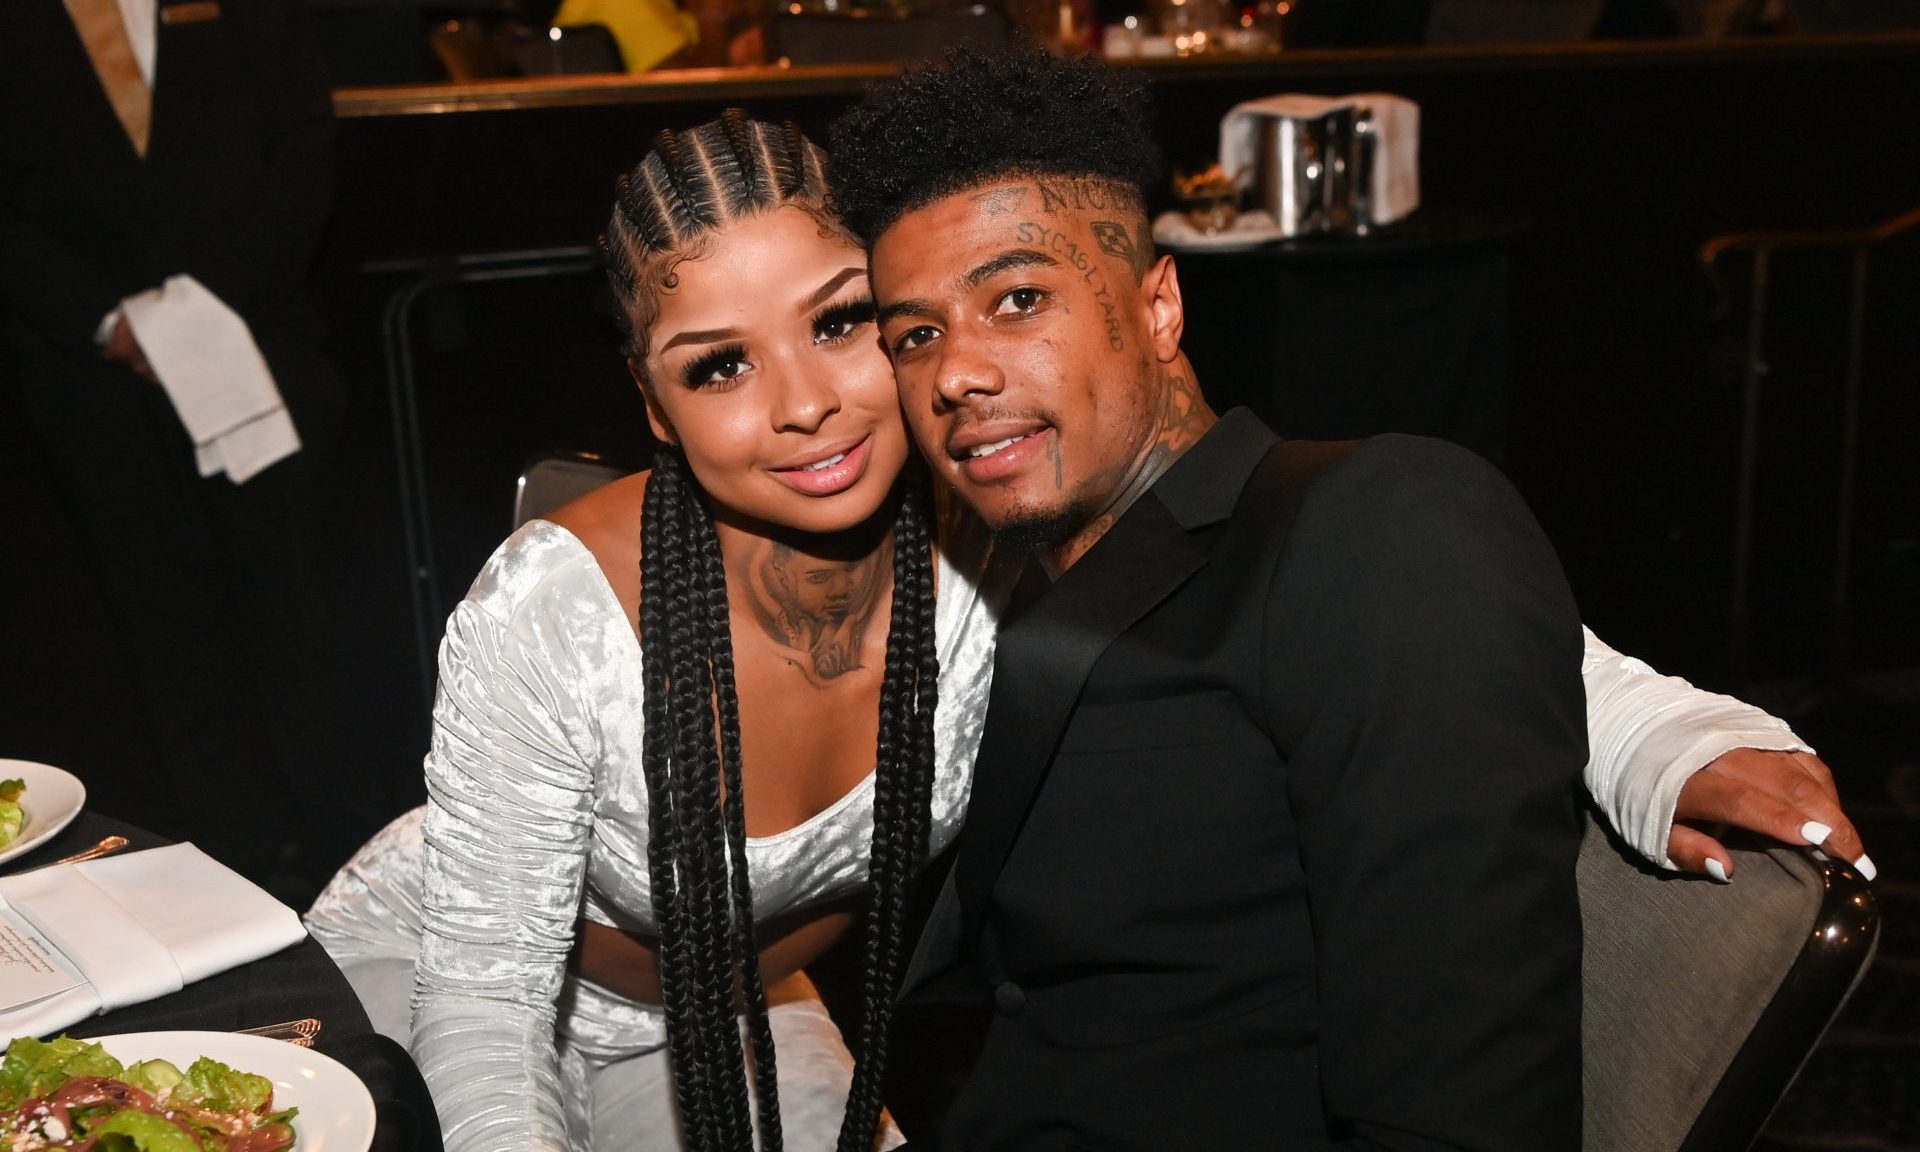 Blueface, Chrisean All Loved Up In Club Just Weeks After Fight Video